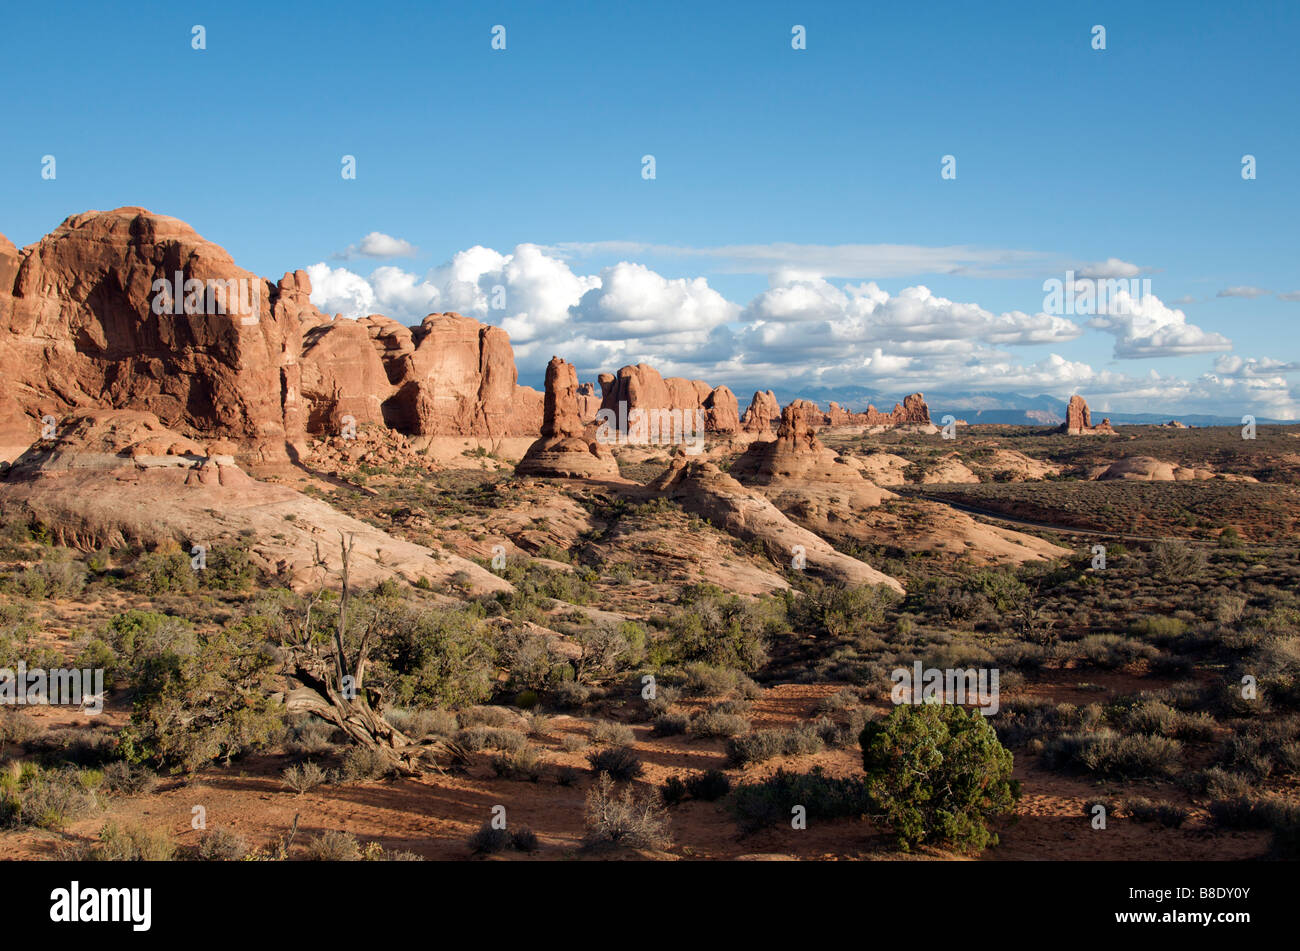 Parade of Elephants in evening light Arches National Park Utah USA Stock Photo